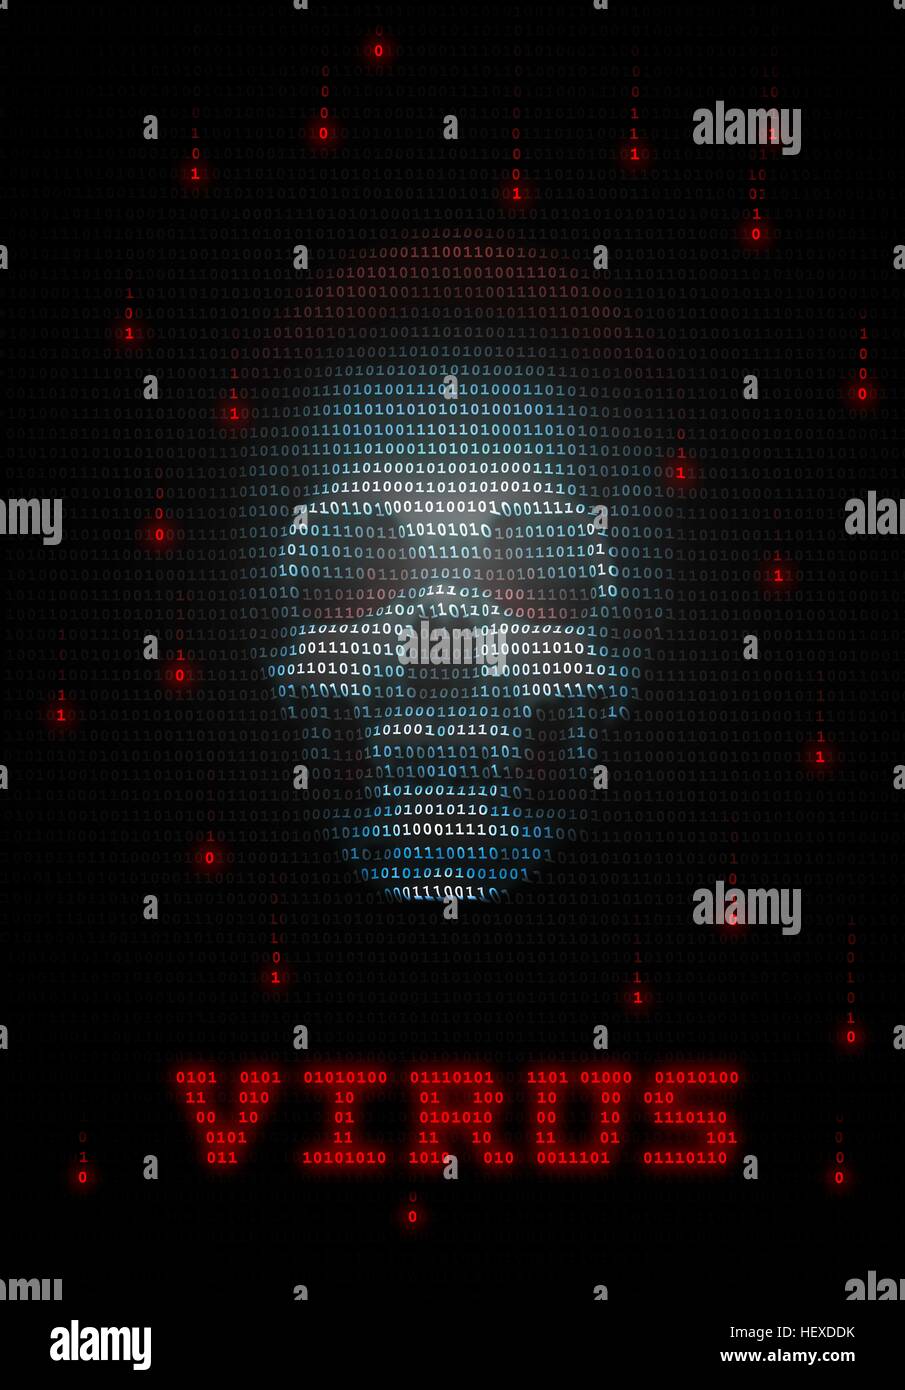 Computer virus, conceptual image. Computer viruses are computer programs that can carry out harmful instructions and copy themselves to other computers. In this image a skull represents a digital virus or trojan on a computer. The surrounding numbers are the ones and zeros of binary code. Stock Photo